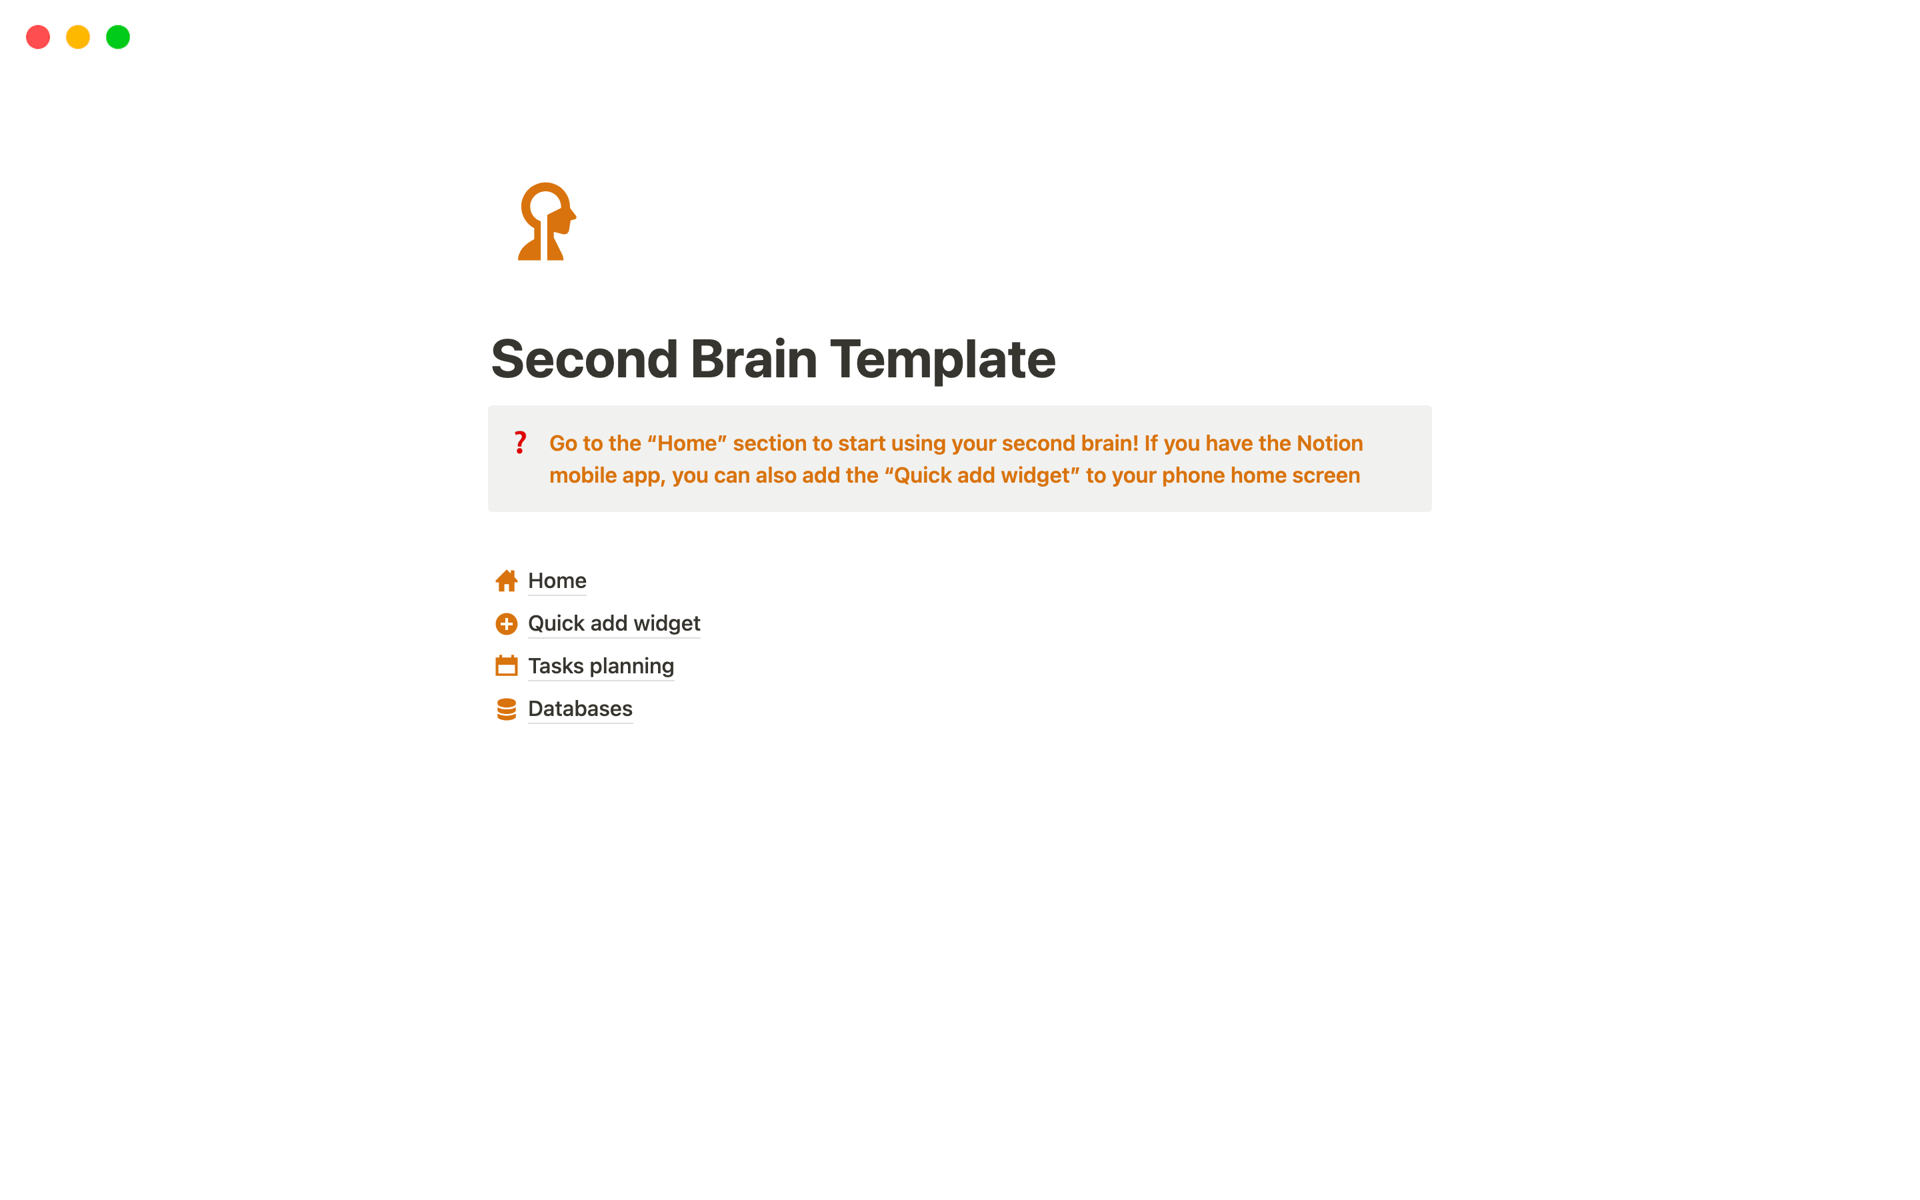 Second Brain: An all-in-one organizational powerhouse that functions as your digital brain, seamlessly managing tasks, goals, notes, bookmarks, reminders, and even your finances for enhanced productivity and efficiency.